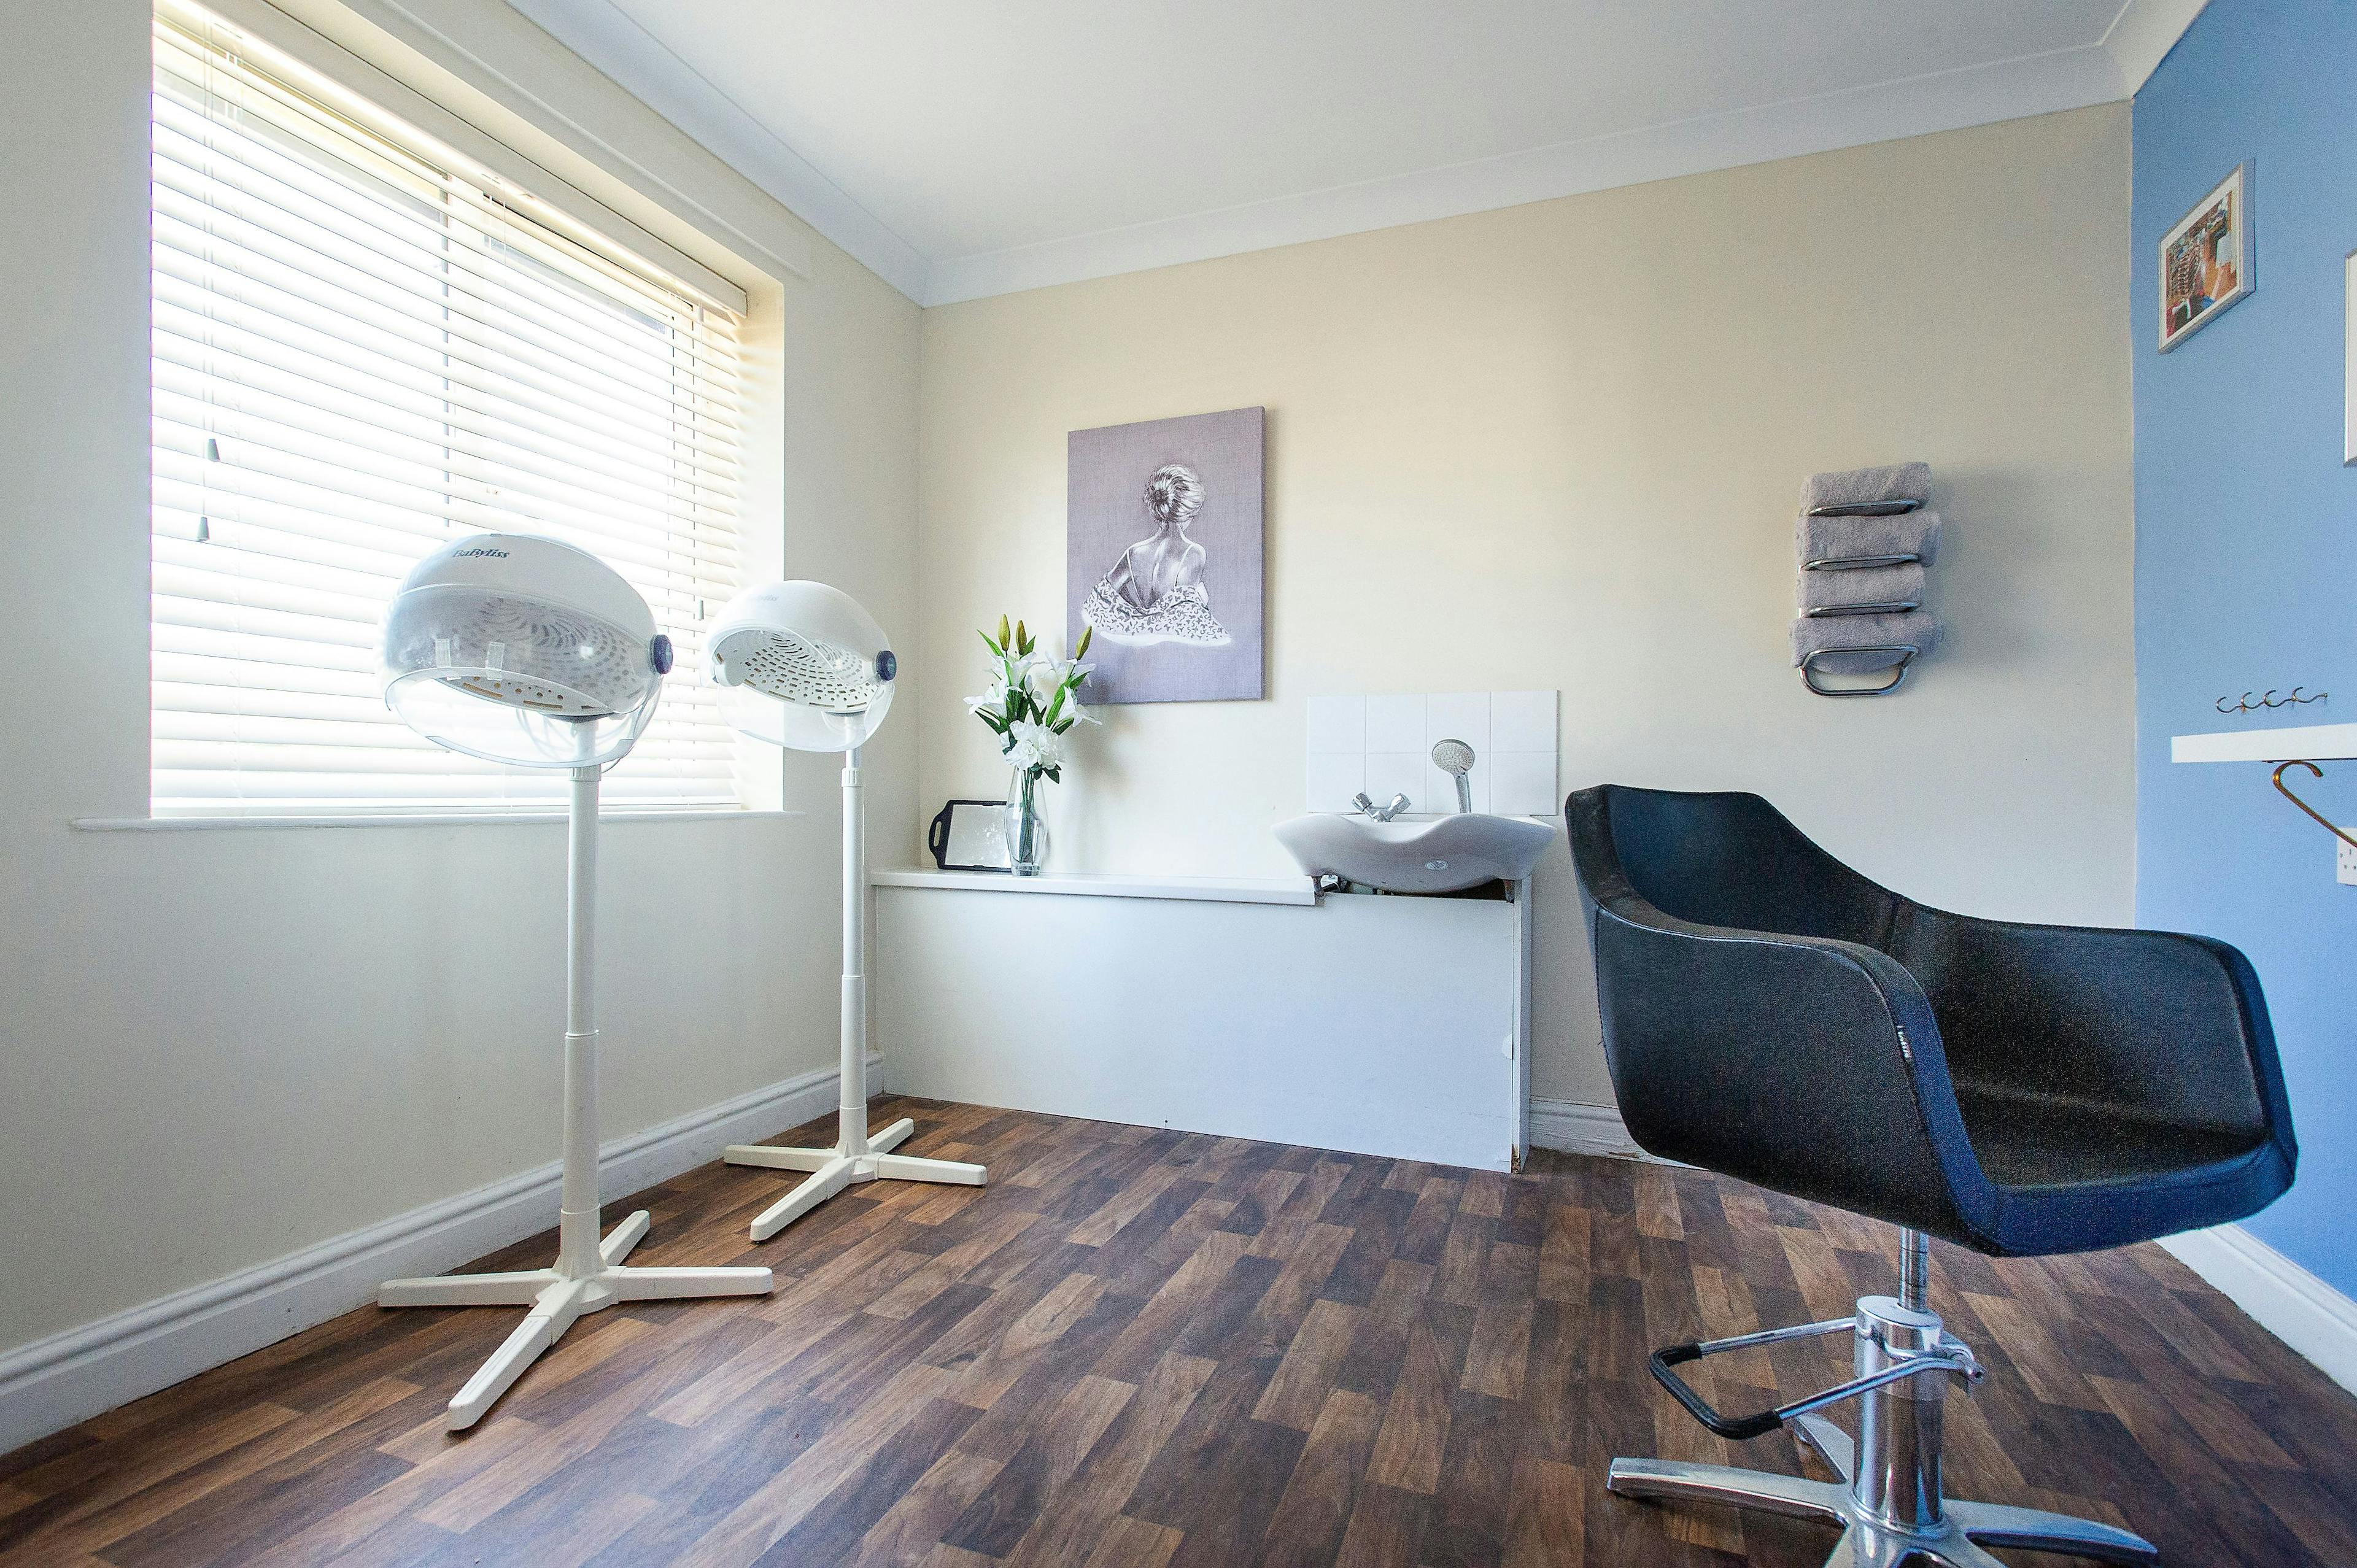 Salon at Ashwood Park Care Home in Peterlee, County Durham